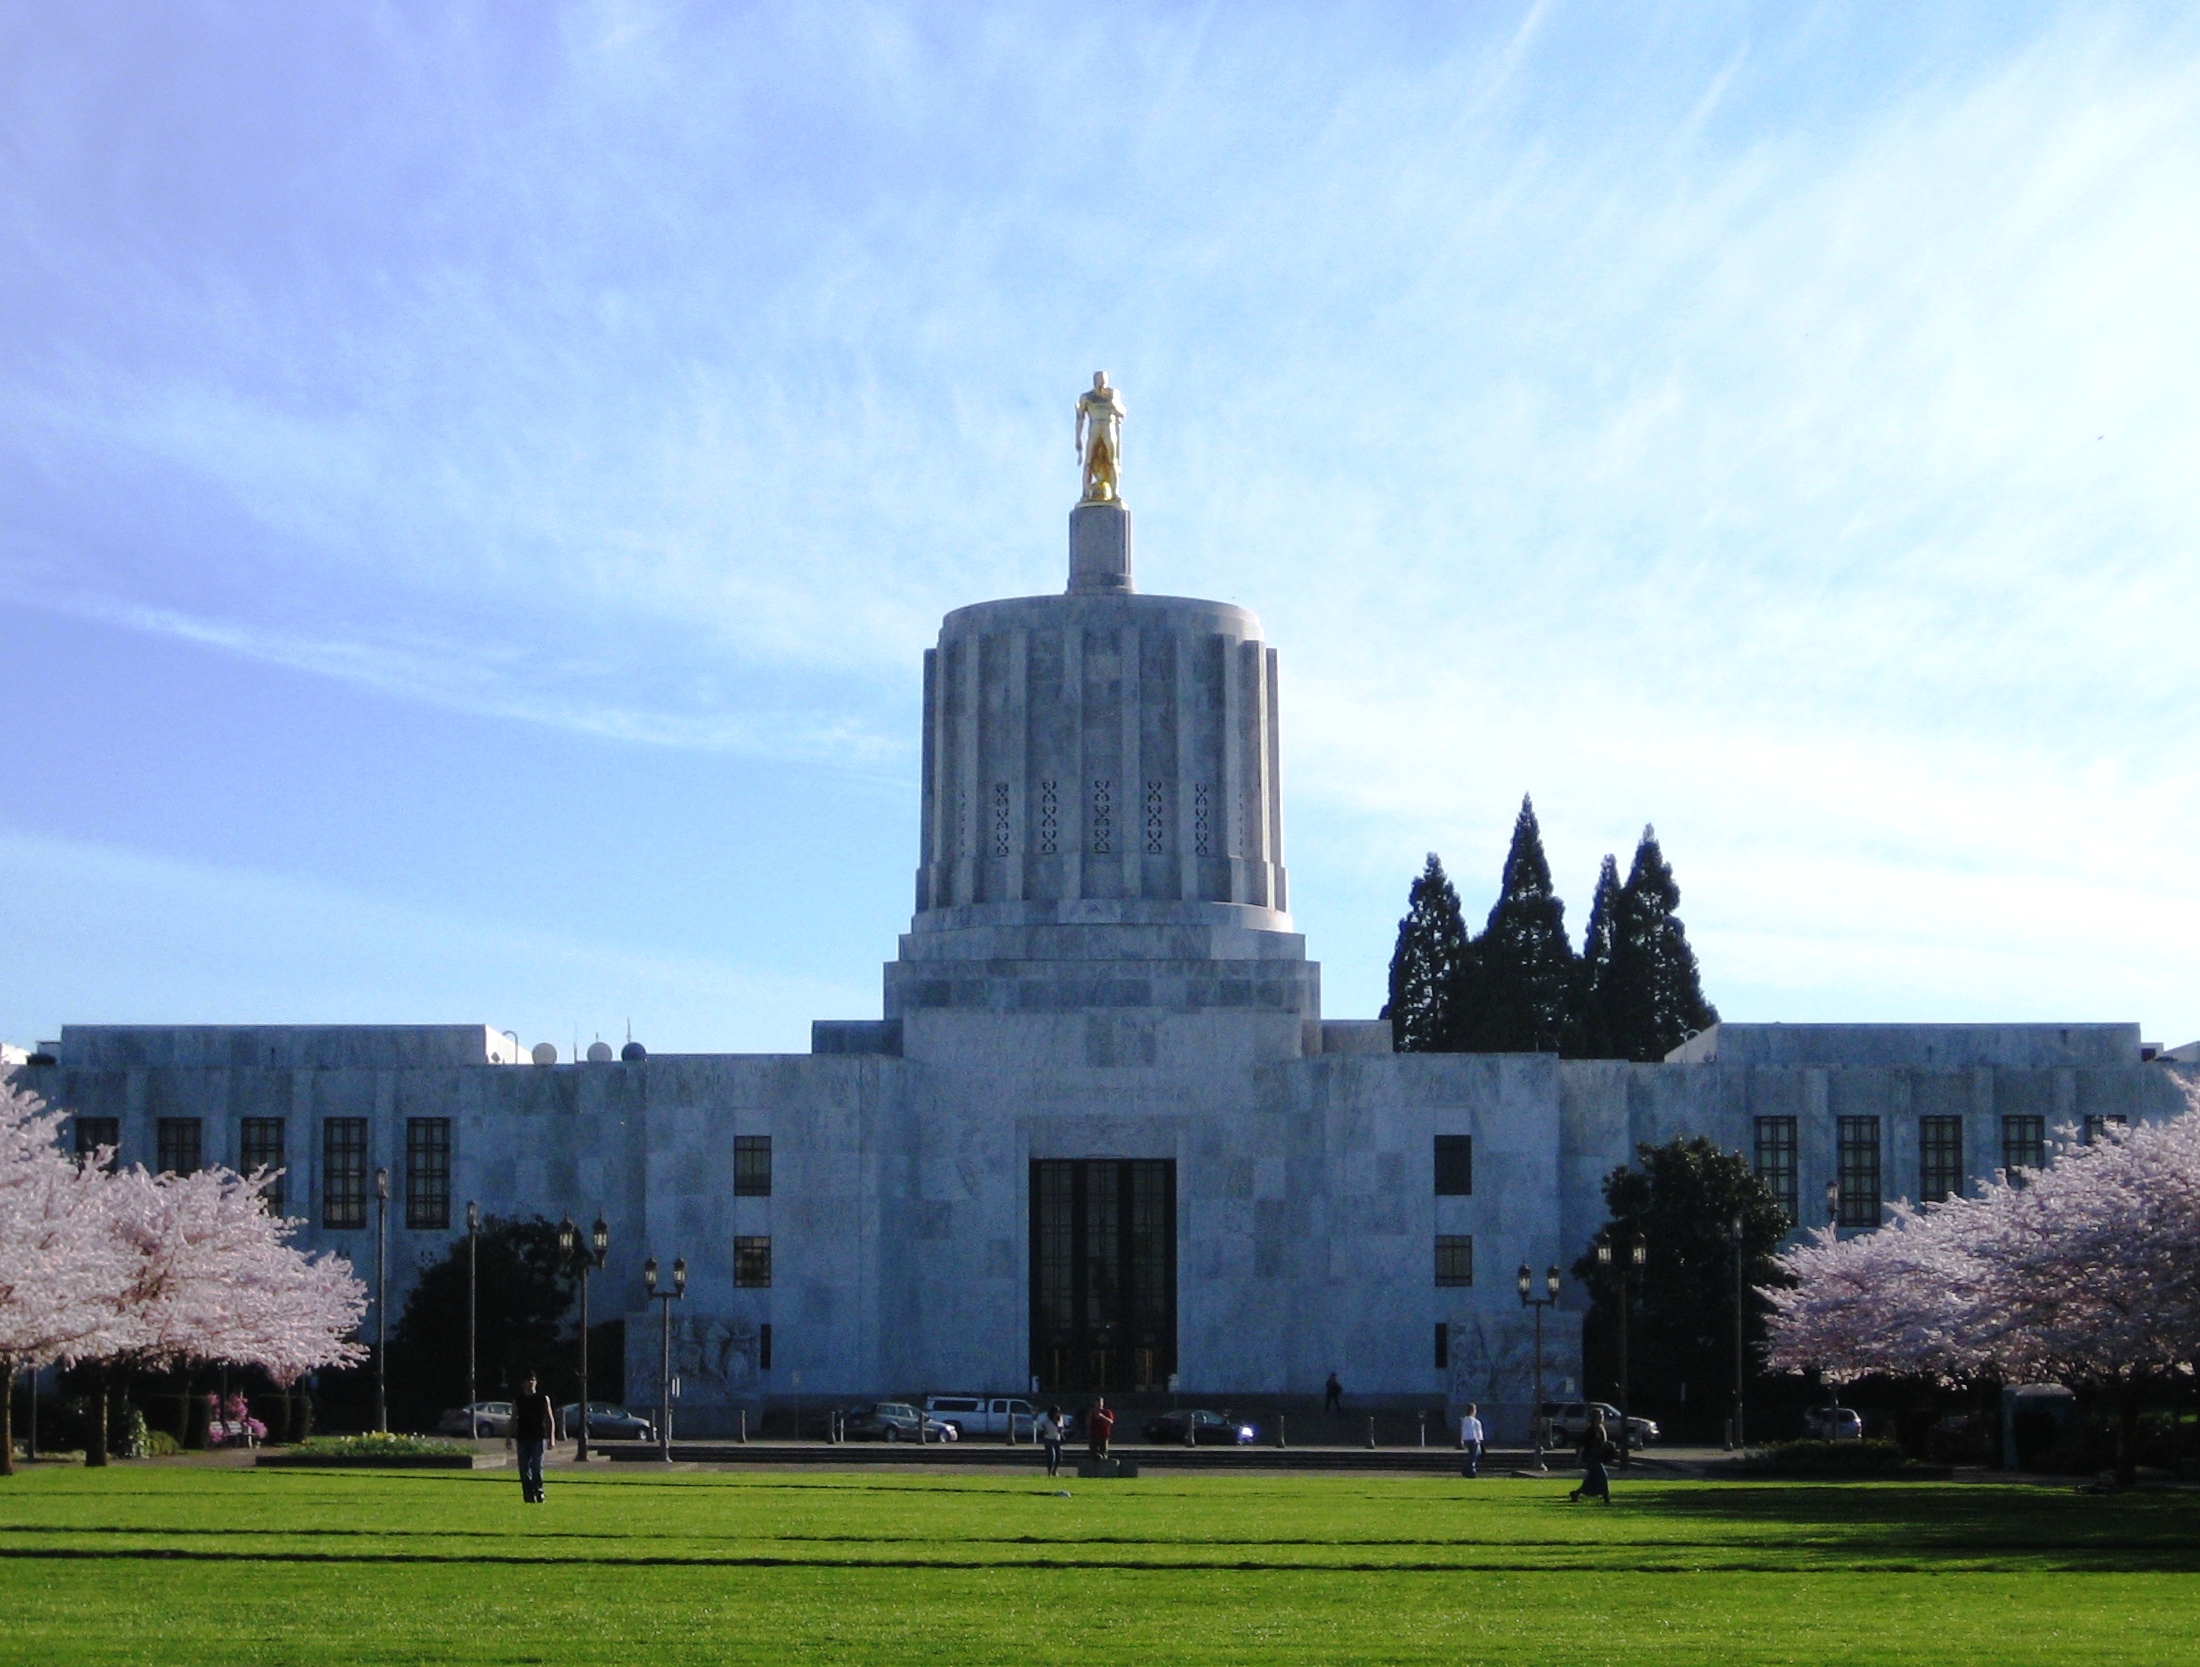 Oregon State Capitol building, photograph by M.O. Stevens